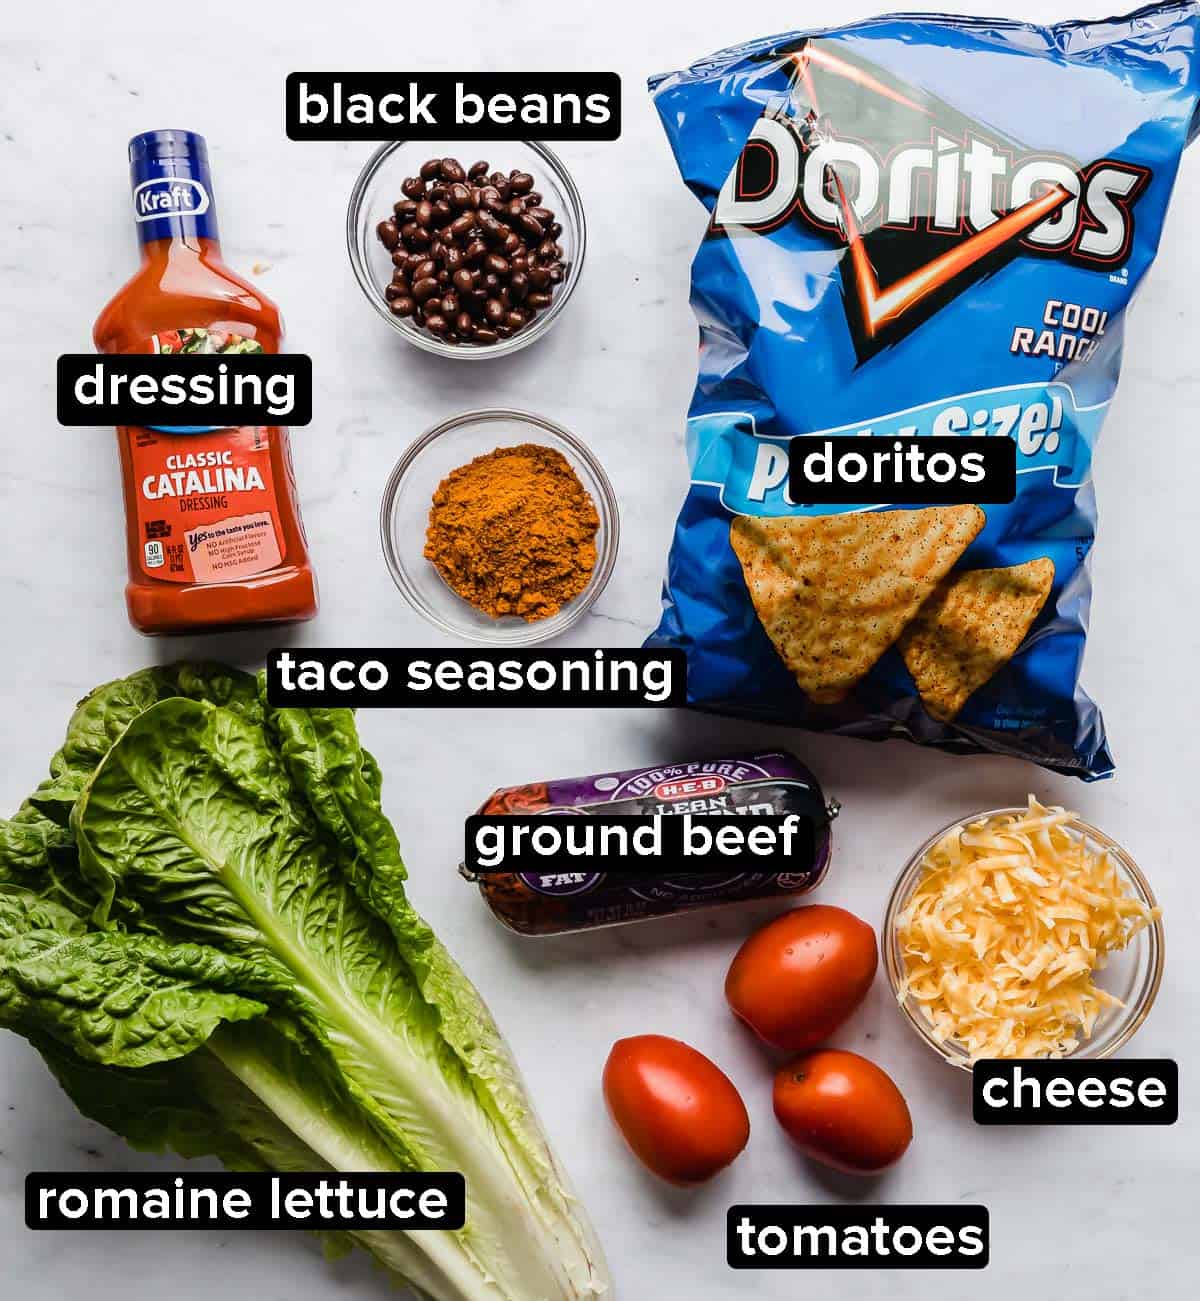 Doritos Taco Salad ingredients on a white background: ground beef, tomatoes, cheese, cool ranch Doritos, lettuce, Catalina dressing.